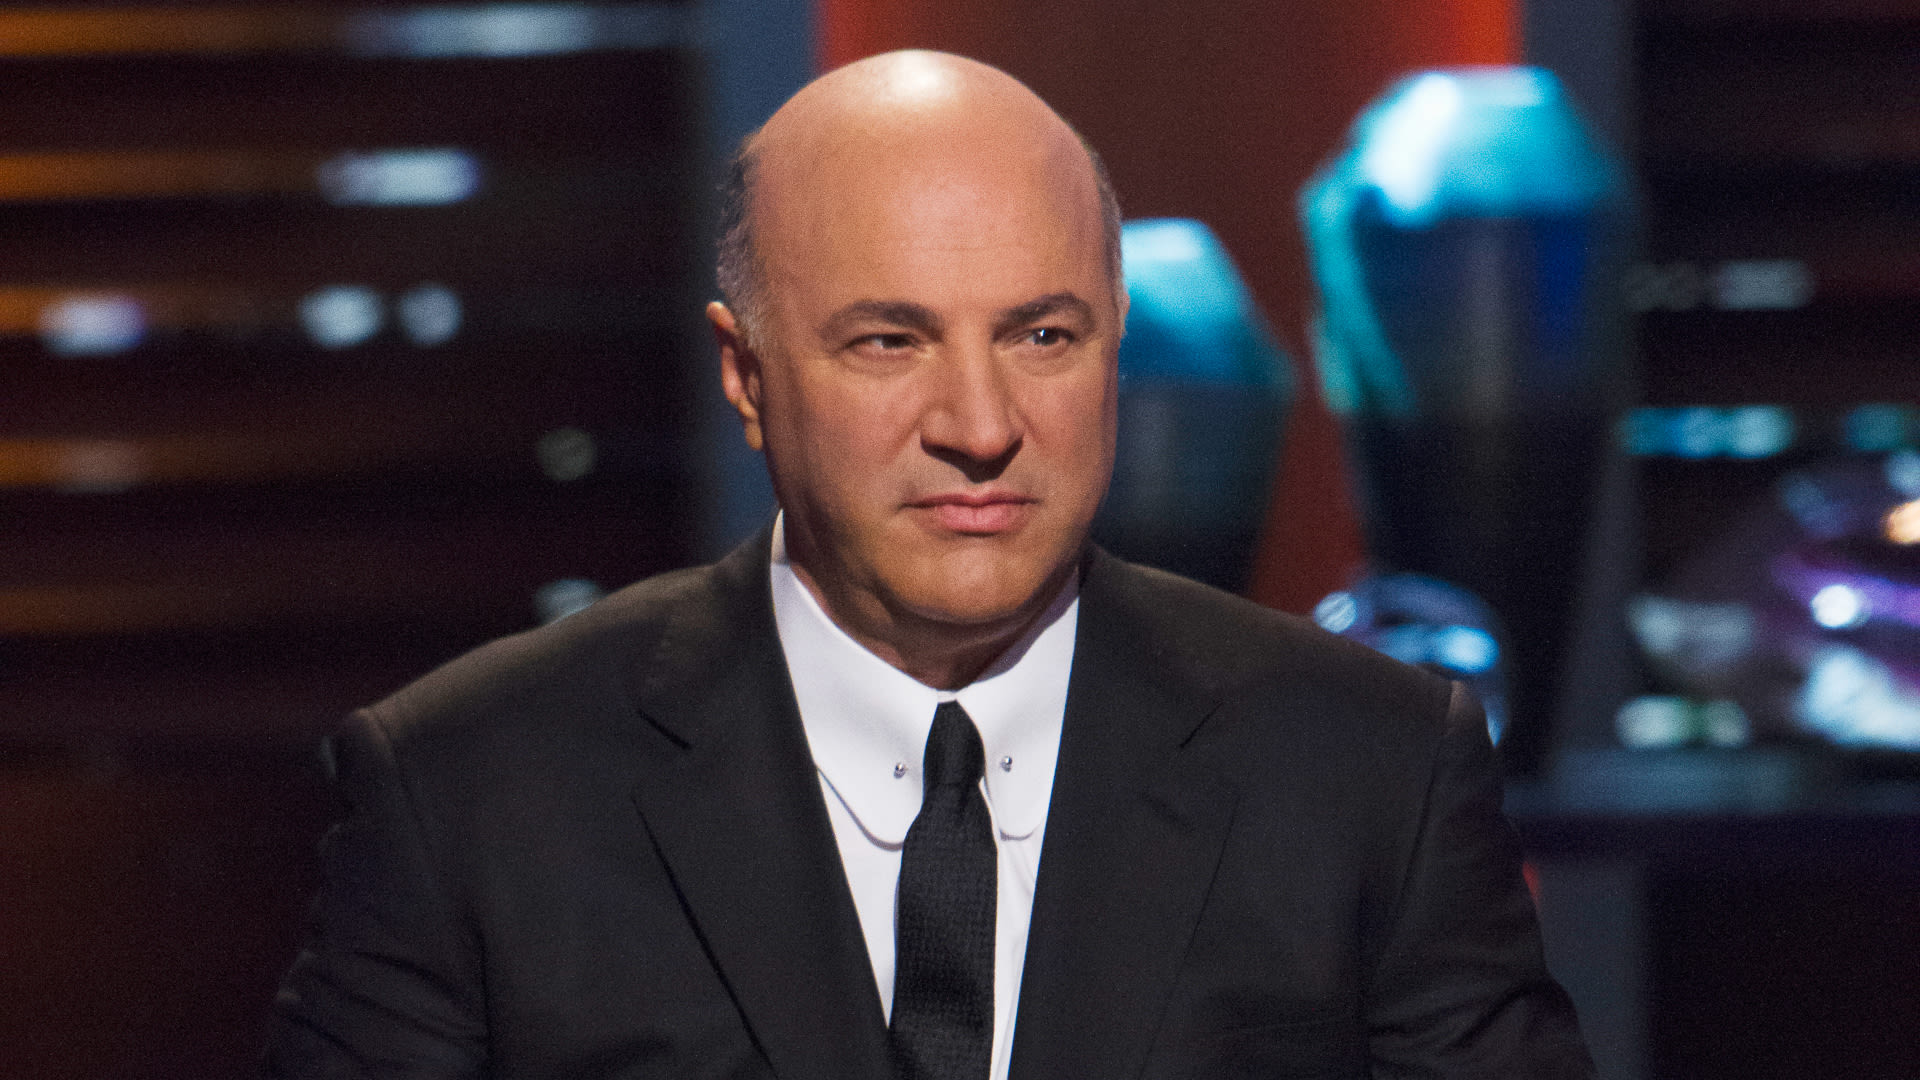 Kevin O’Leary Says Don’t Loan Money to Family Members — Do This Instead